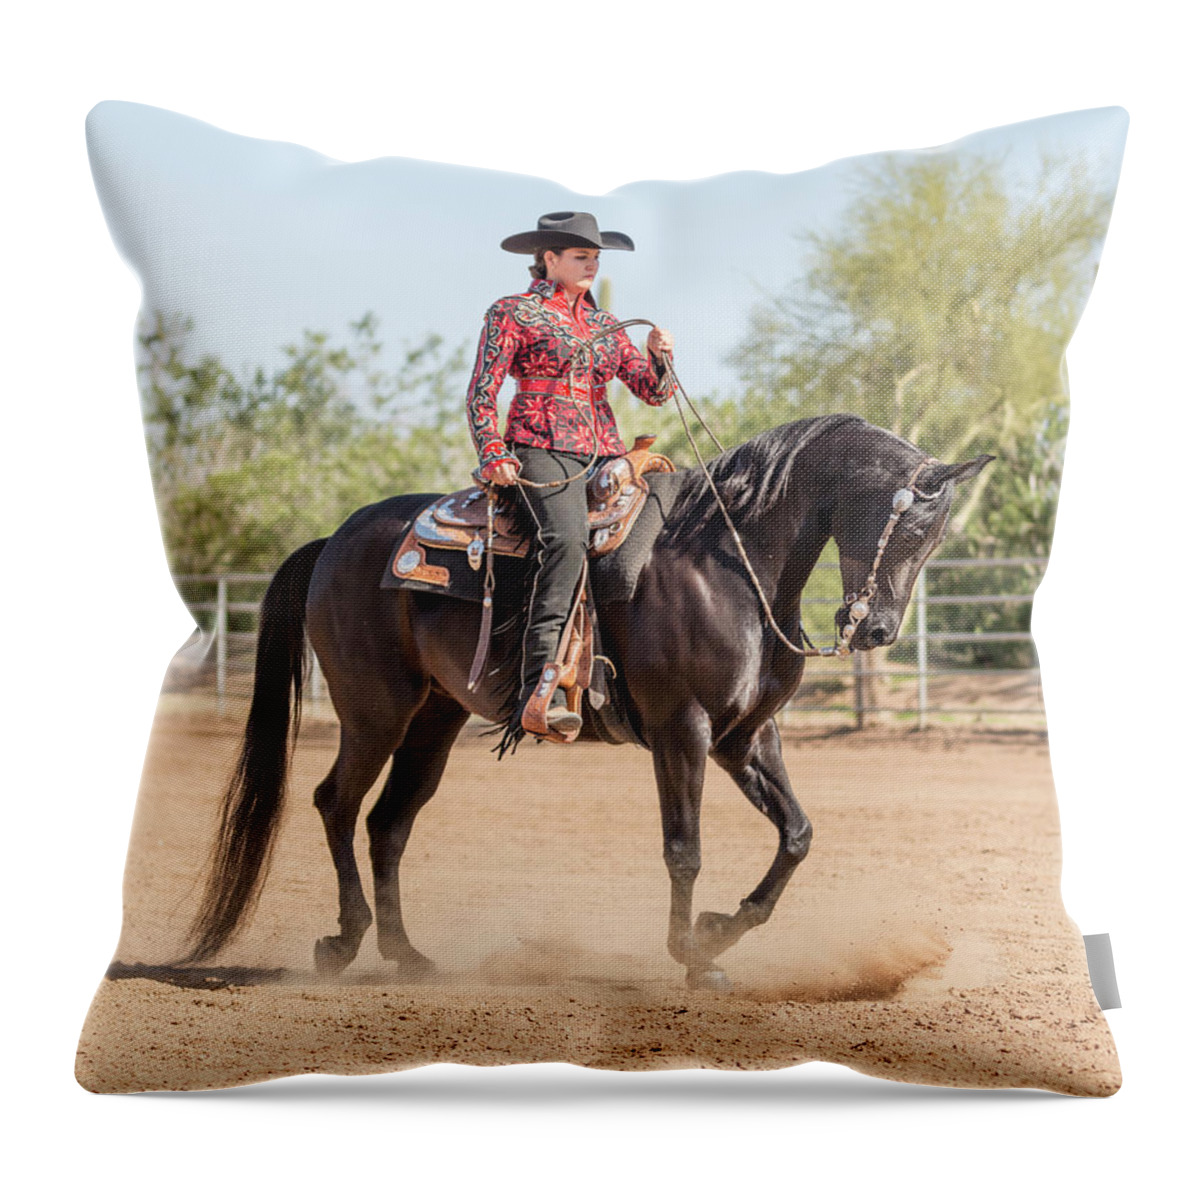 Horse Throw Pillow featuring the photograph Arabian Horse With Rider Dressed For by Lokibaho